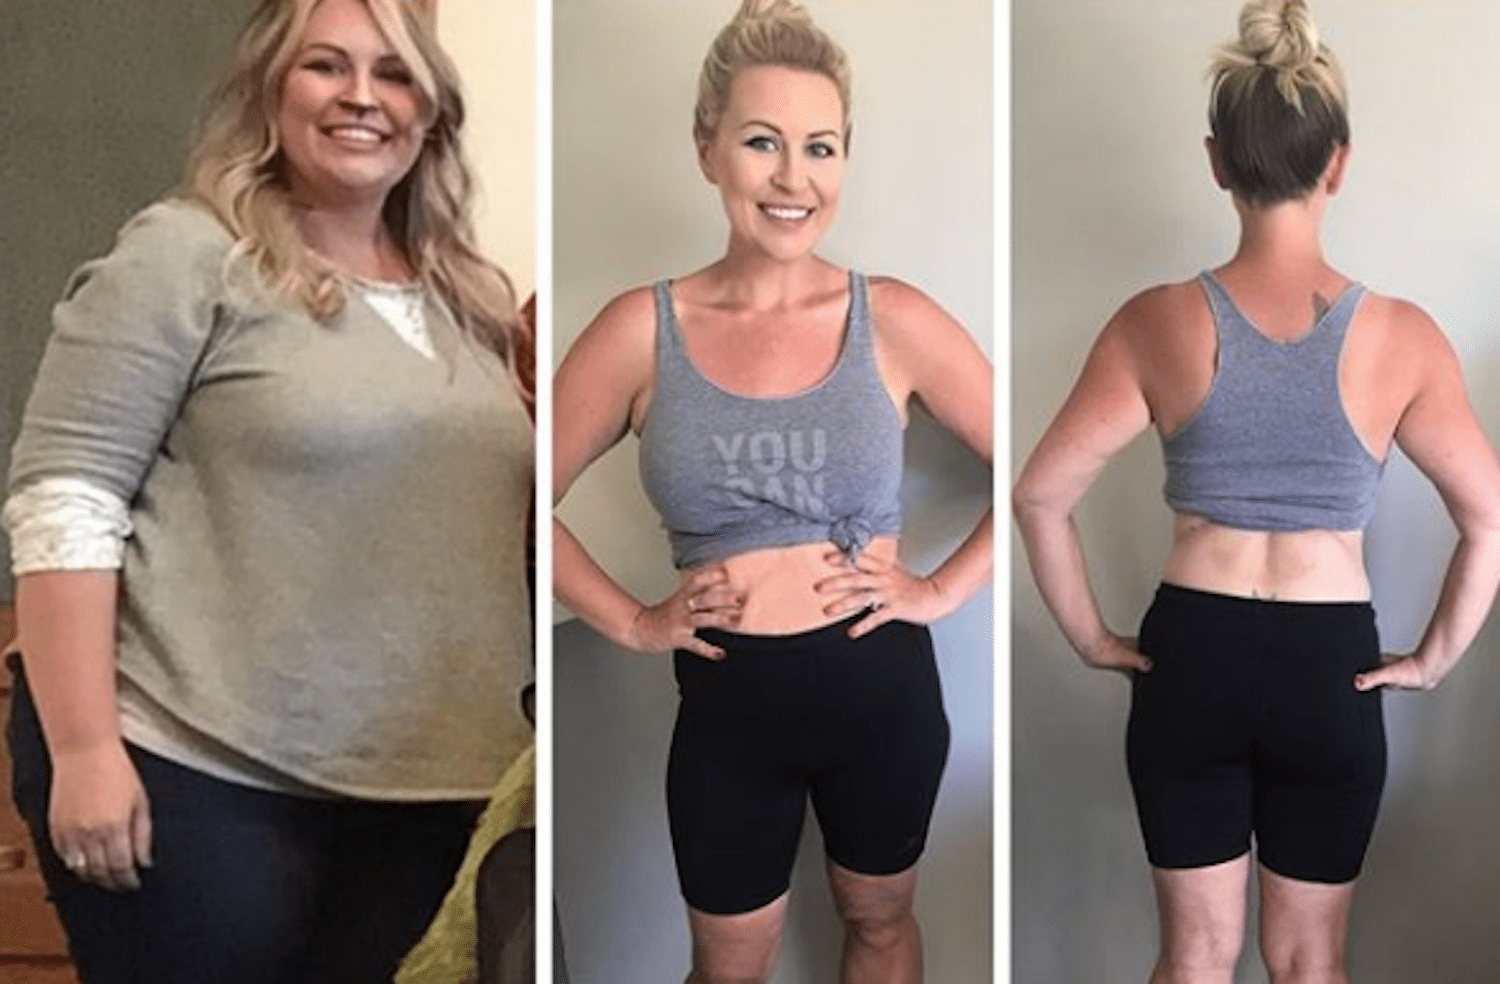 11 beforeandafter photos that show how weightlifting can transform